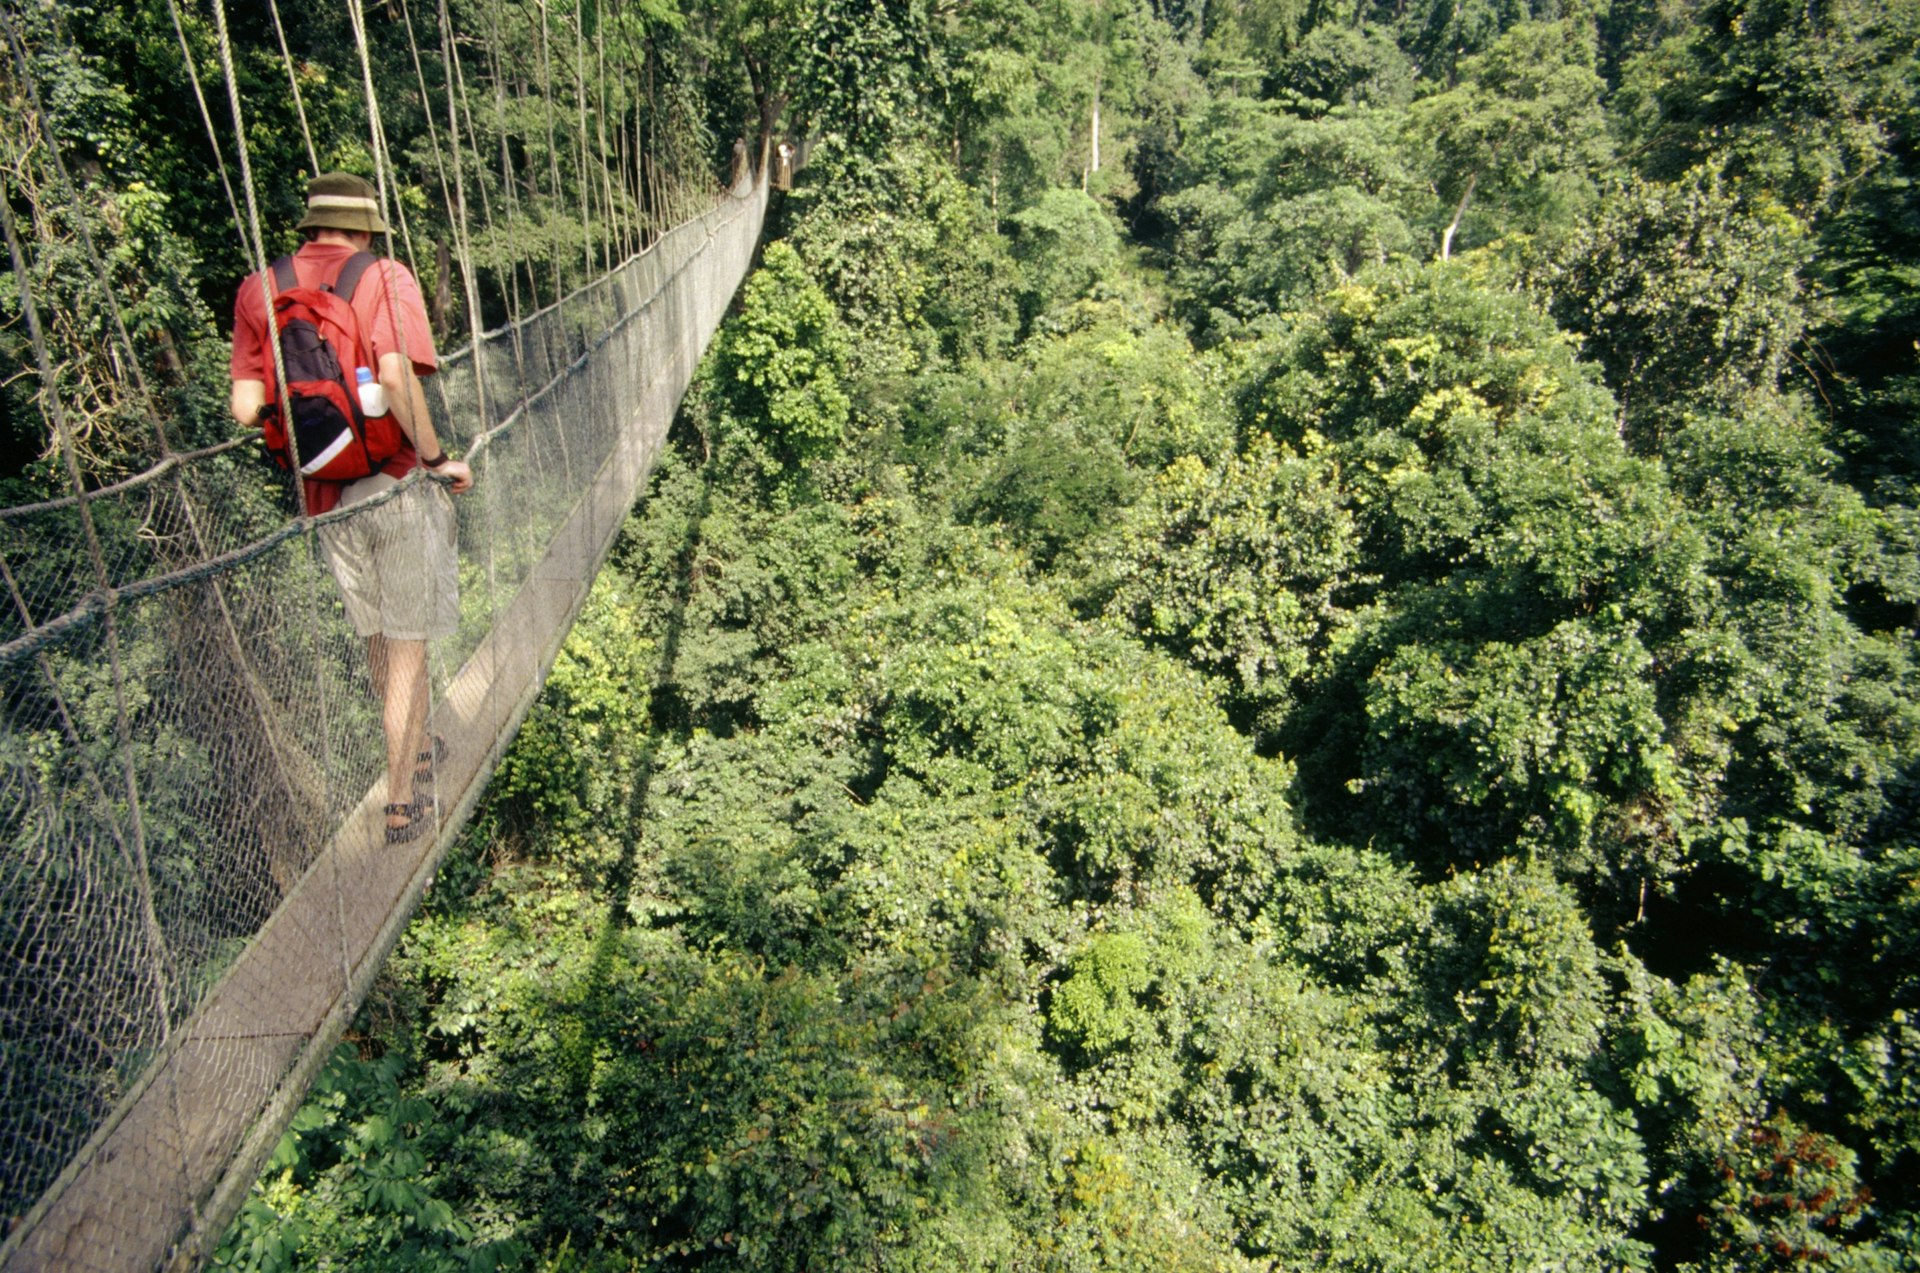 A hiker on a rope suspension bridge, part of the canopy walk at Kakum National Park, Ghana, West Africa